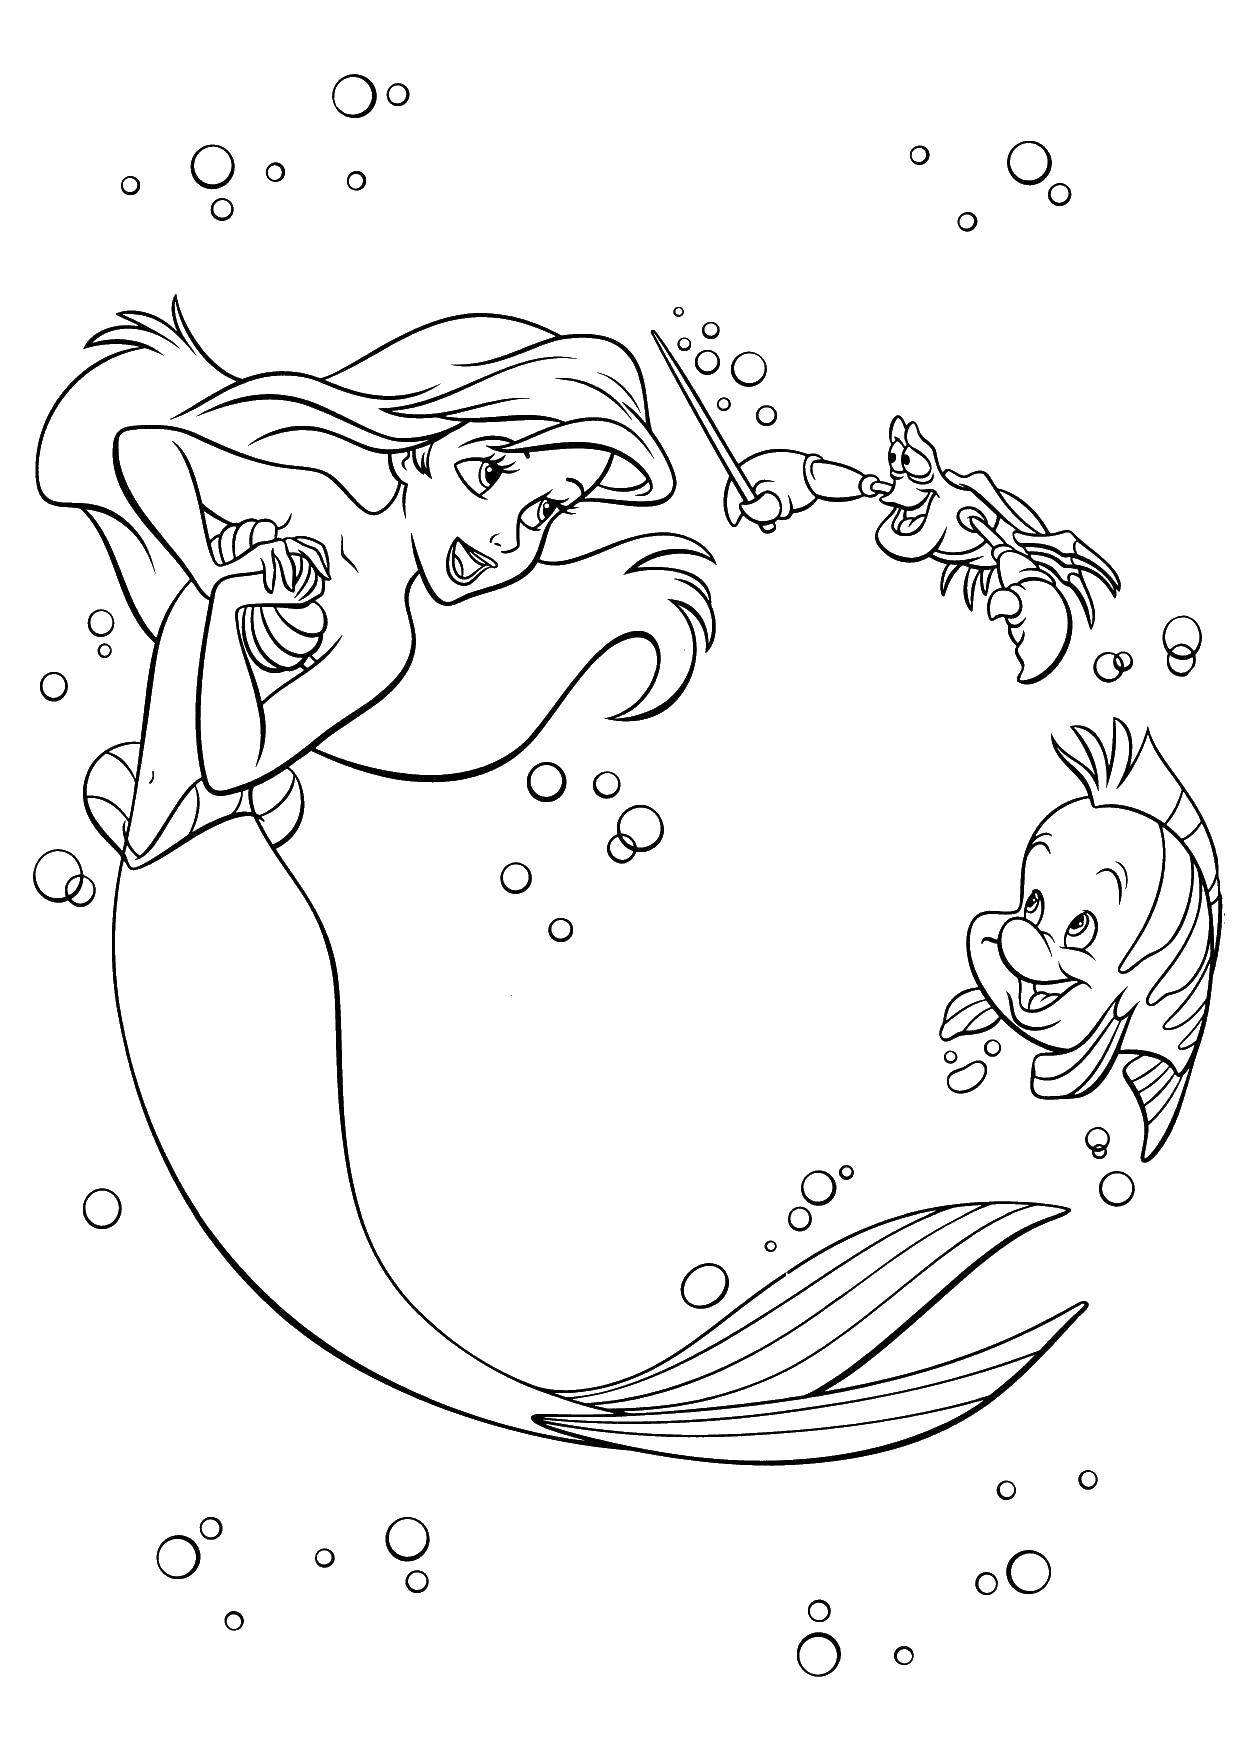 Coloring Ariel, the crab and the fish. Category Princess. Tags:  Princess, Ariel, the little mermaid.